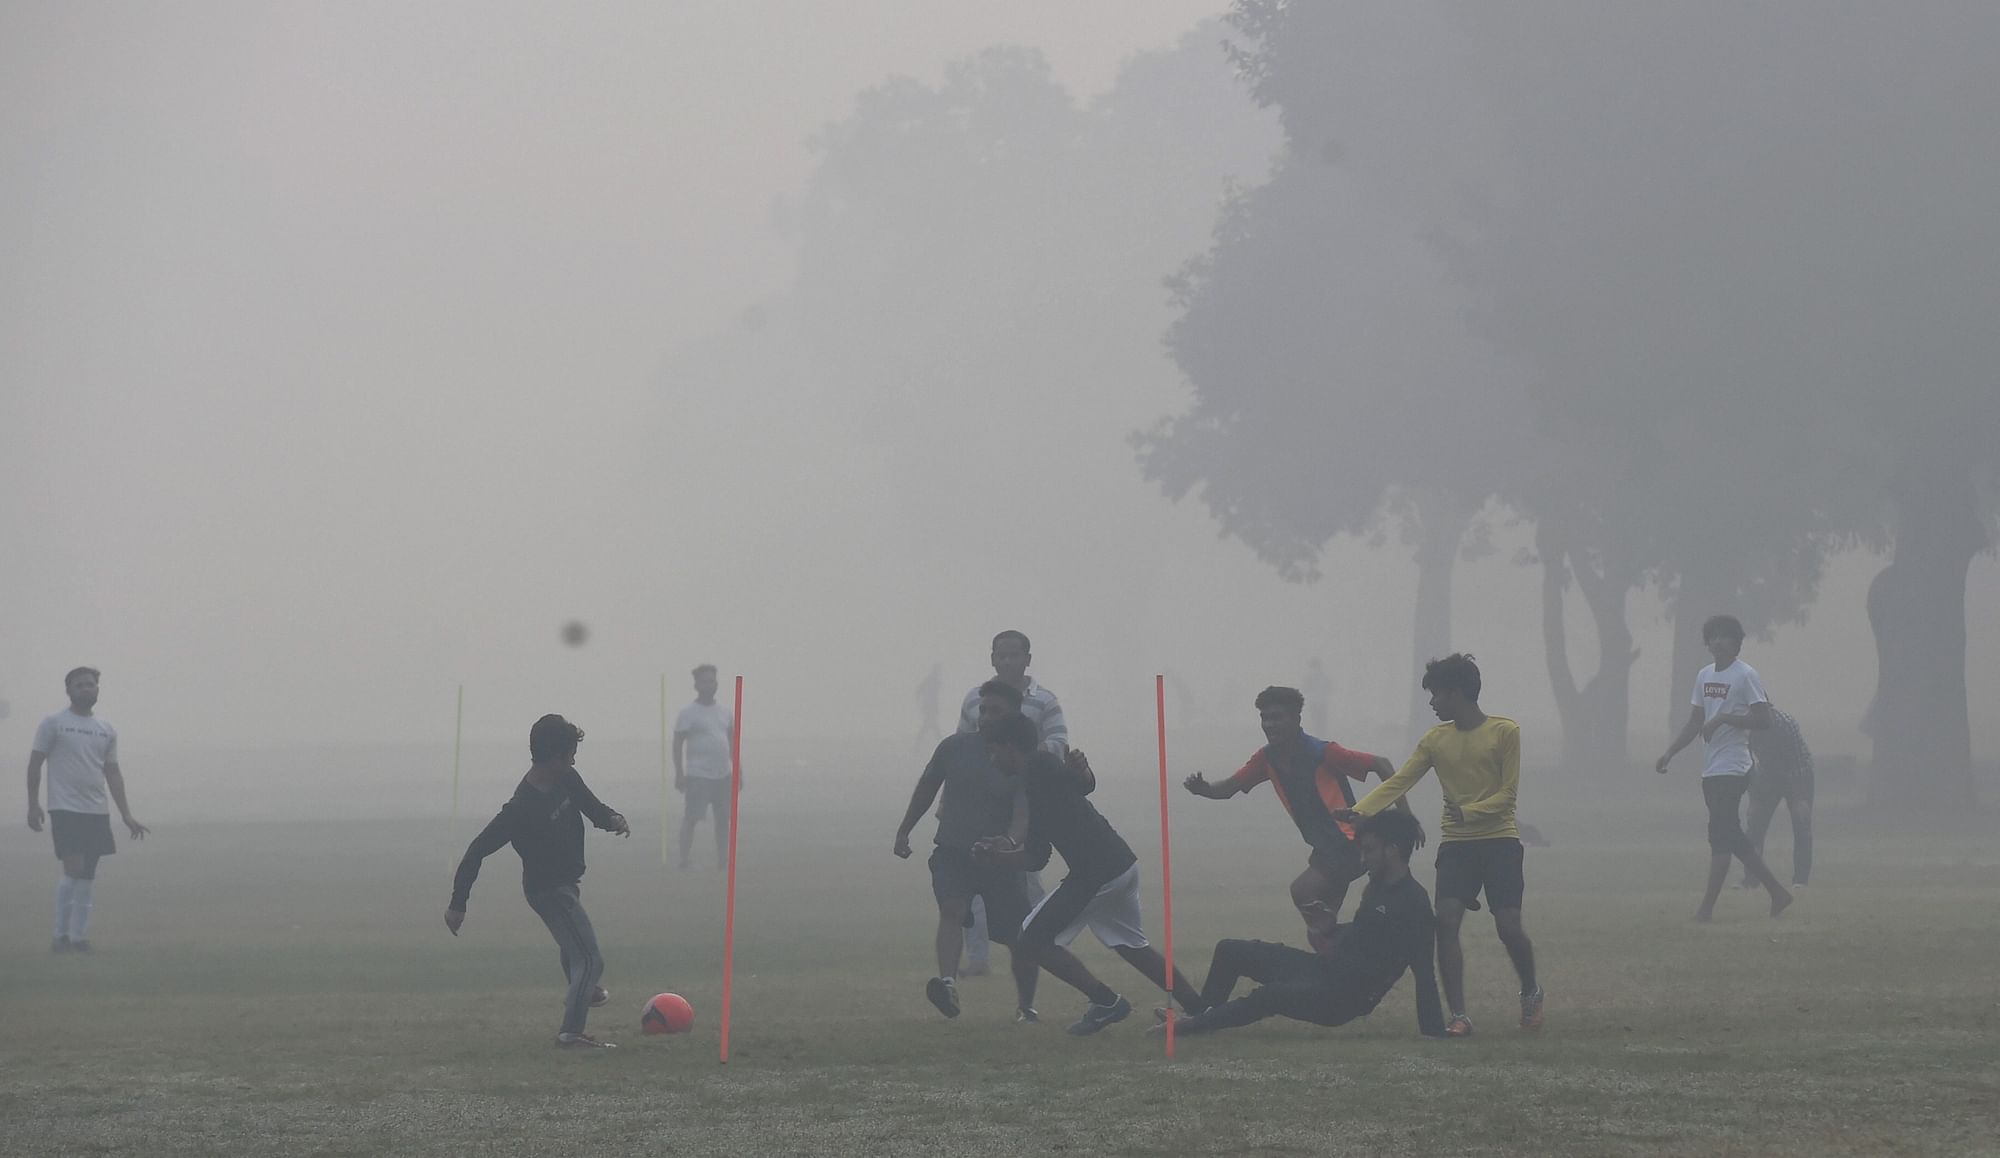 Children play football mids low visibility and smog conditions in Delhi on 15 November. Image used for representation only.